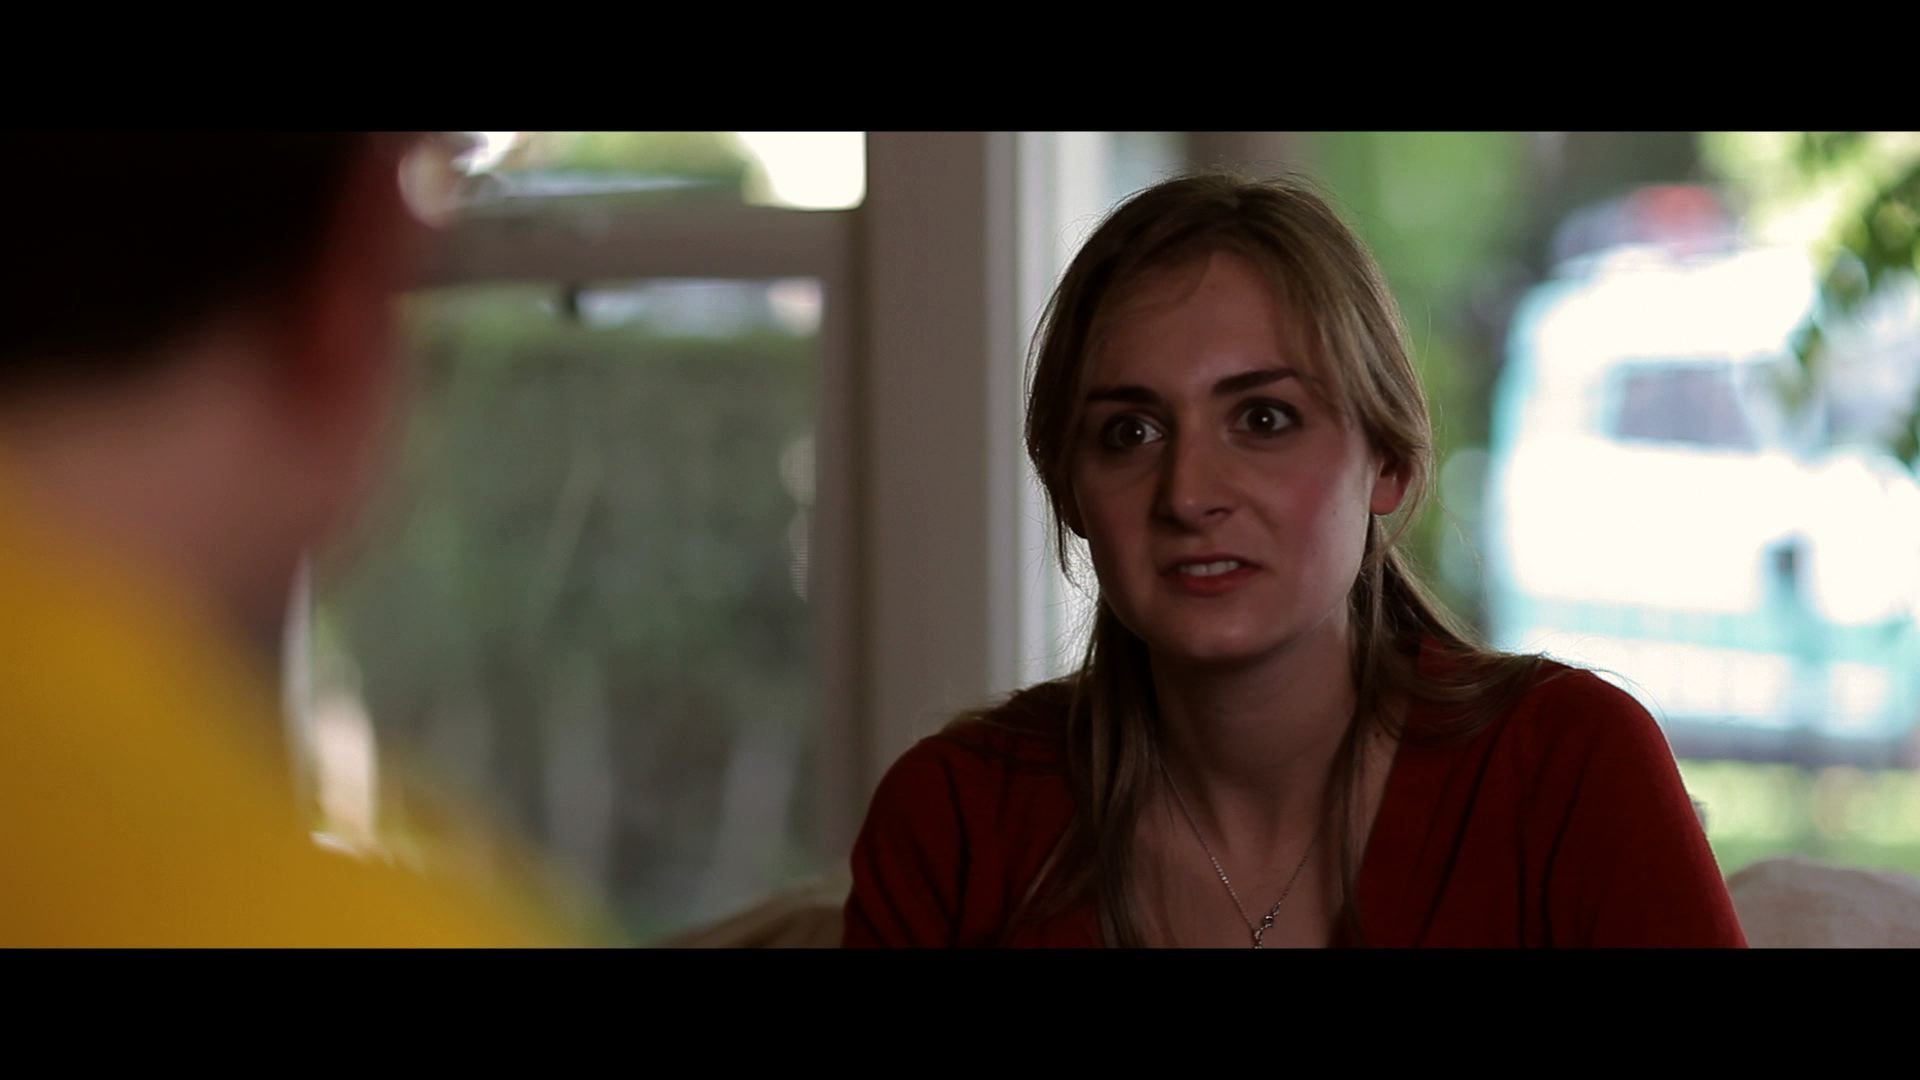 Maria Blasucci. Will Hines. In Bad Dads (2010). Directed by Derek Westerman